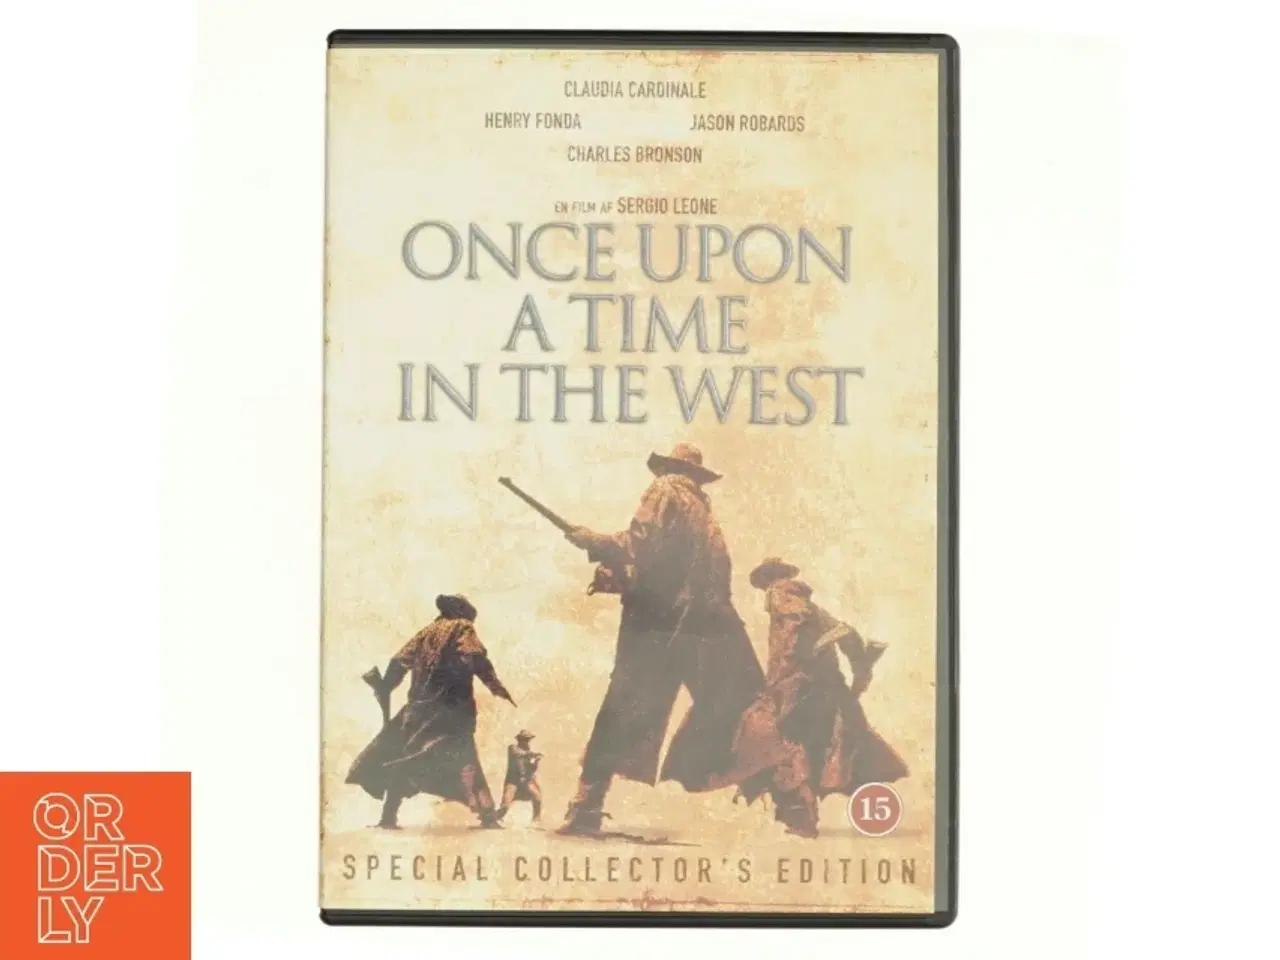 Billede 1 - Once Upon a Time in the West